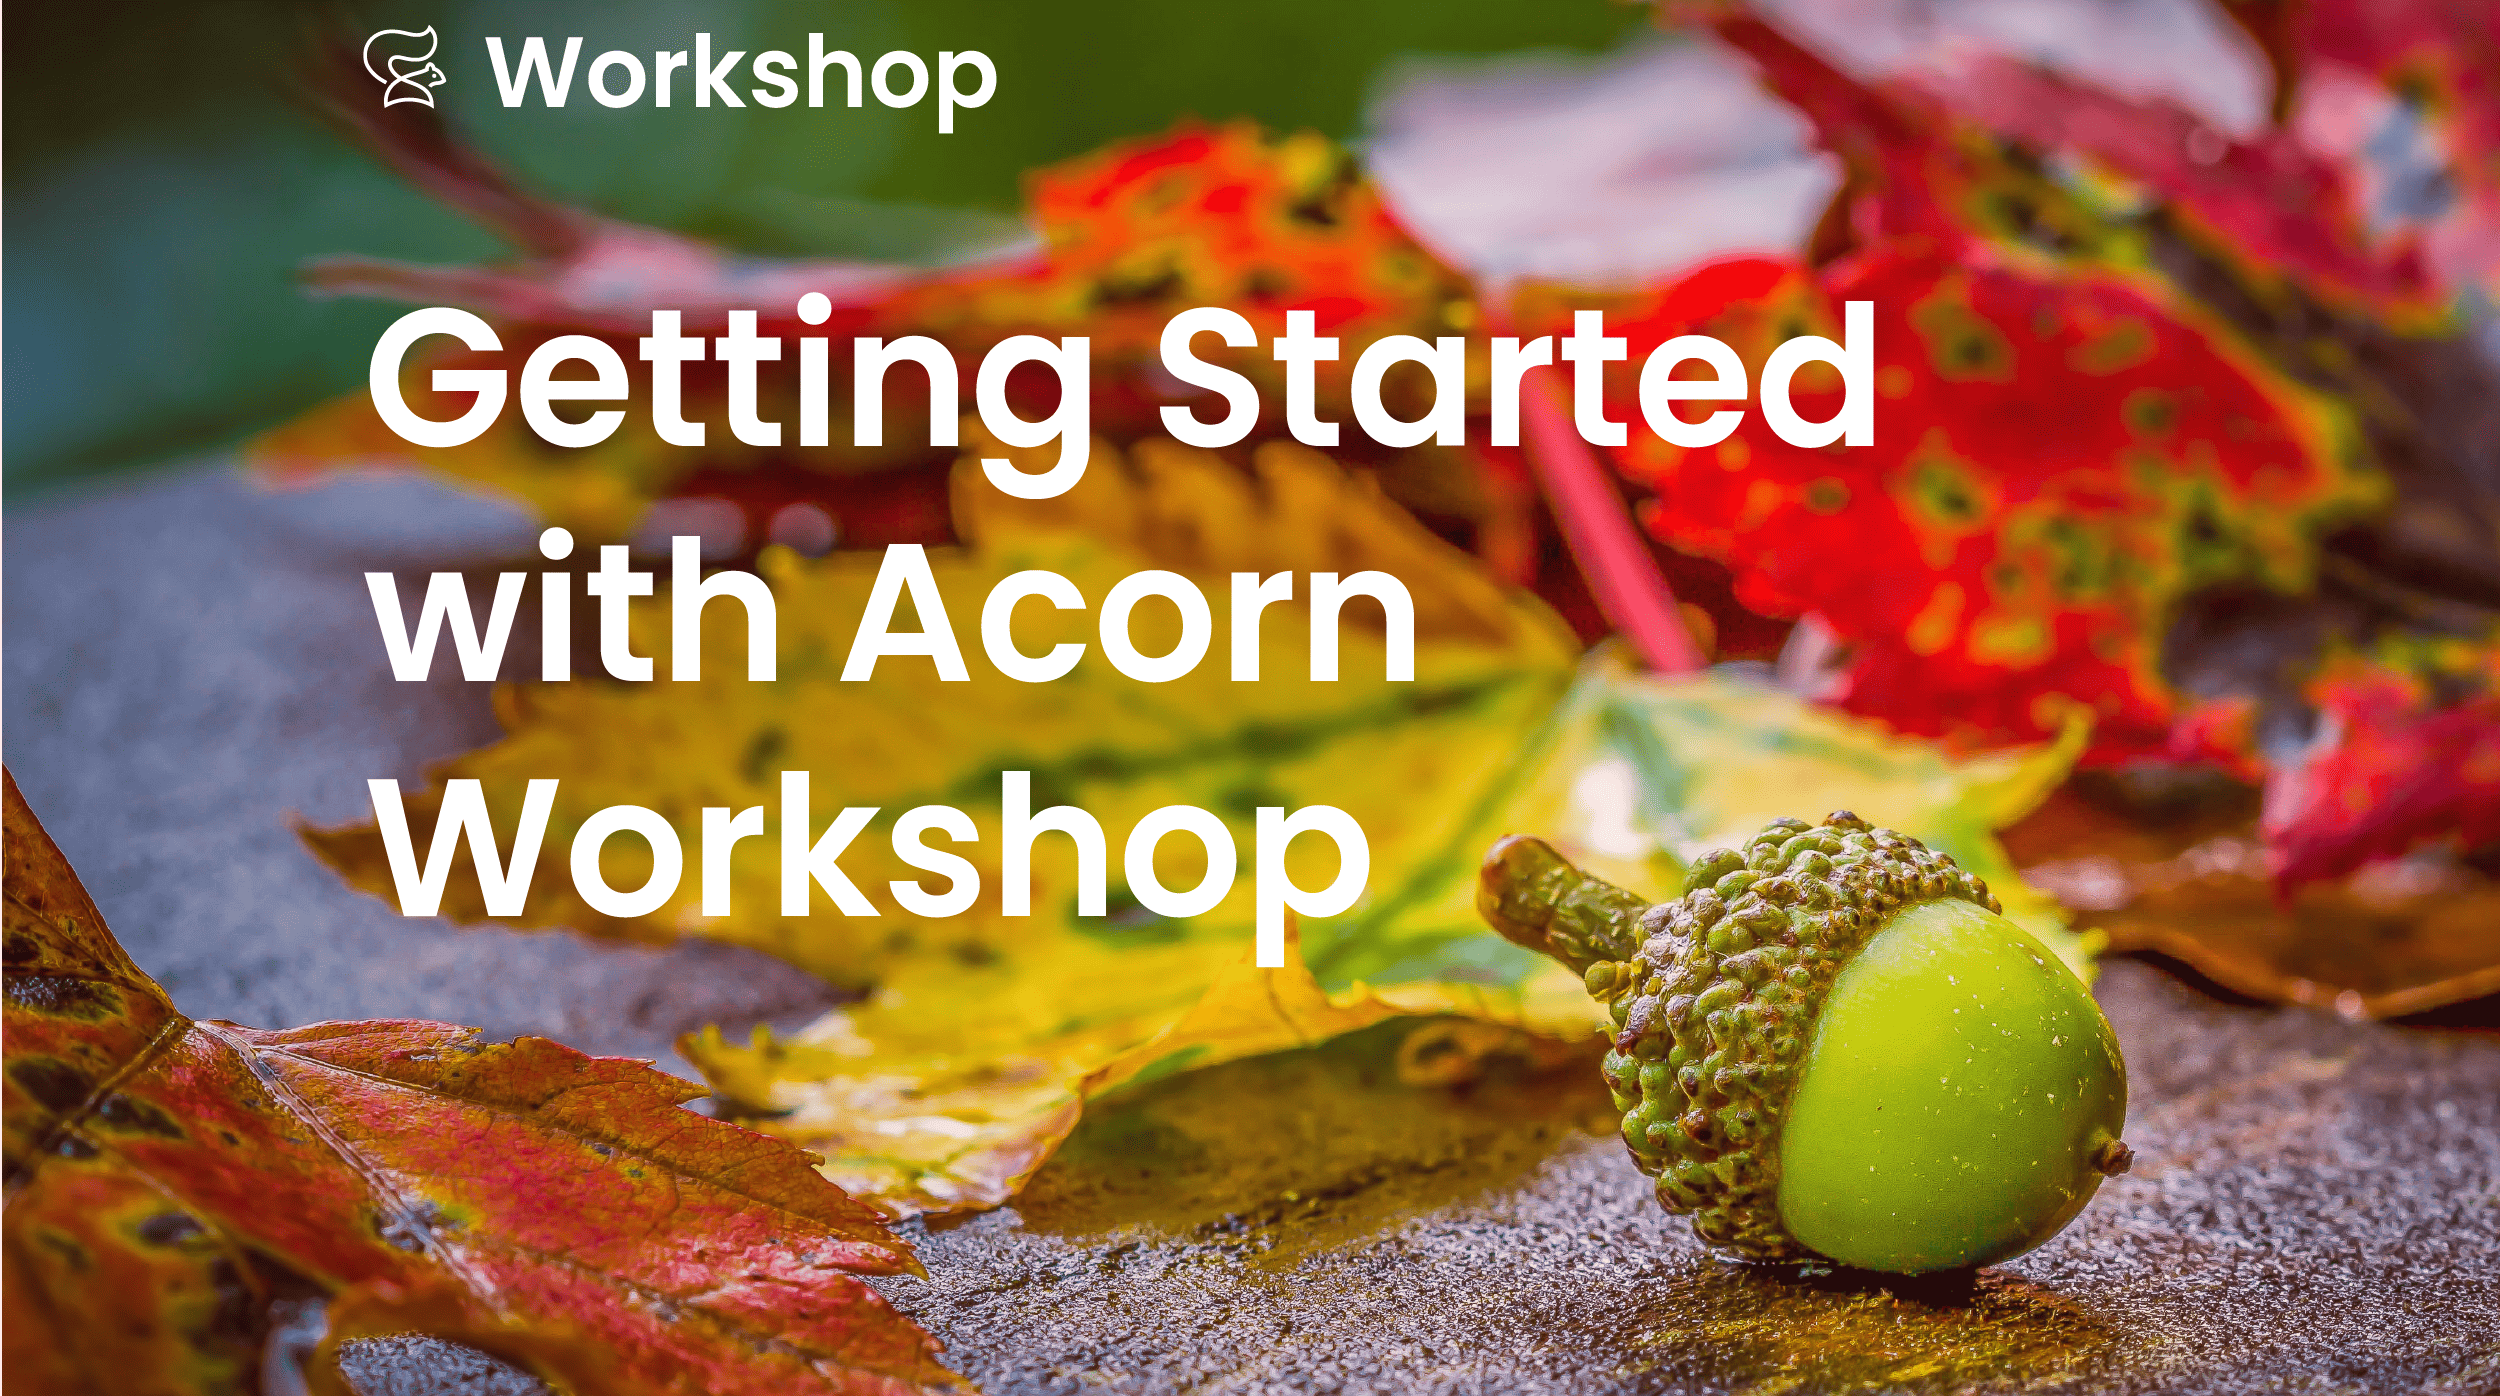 Getting Started with Acorn Workshop